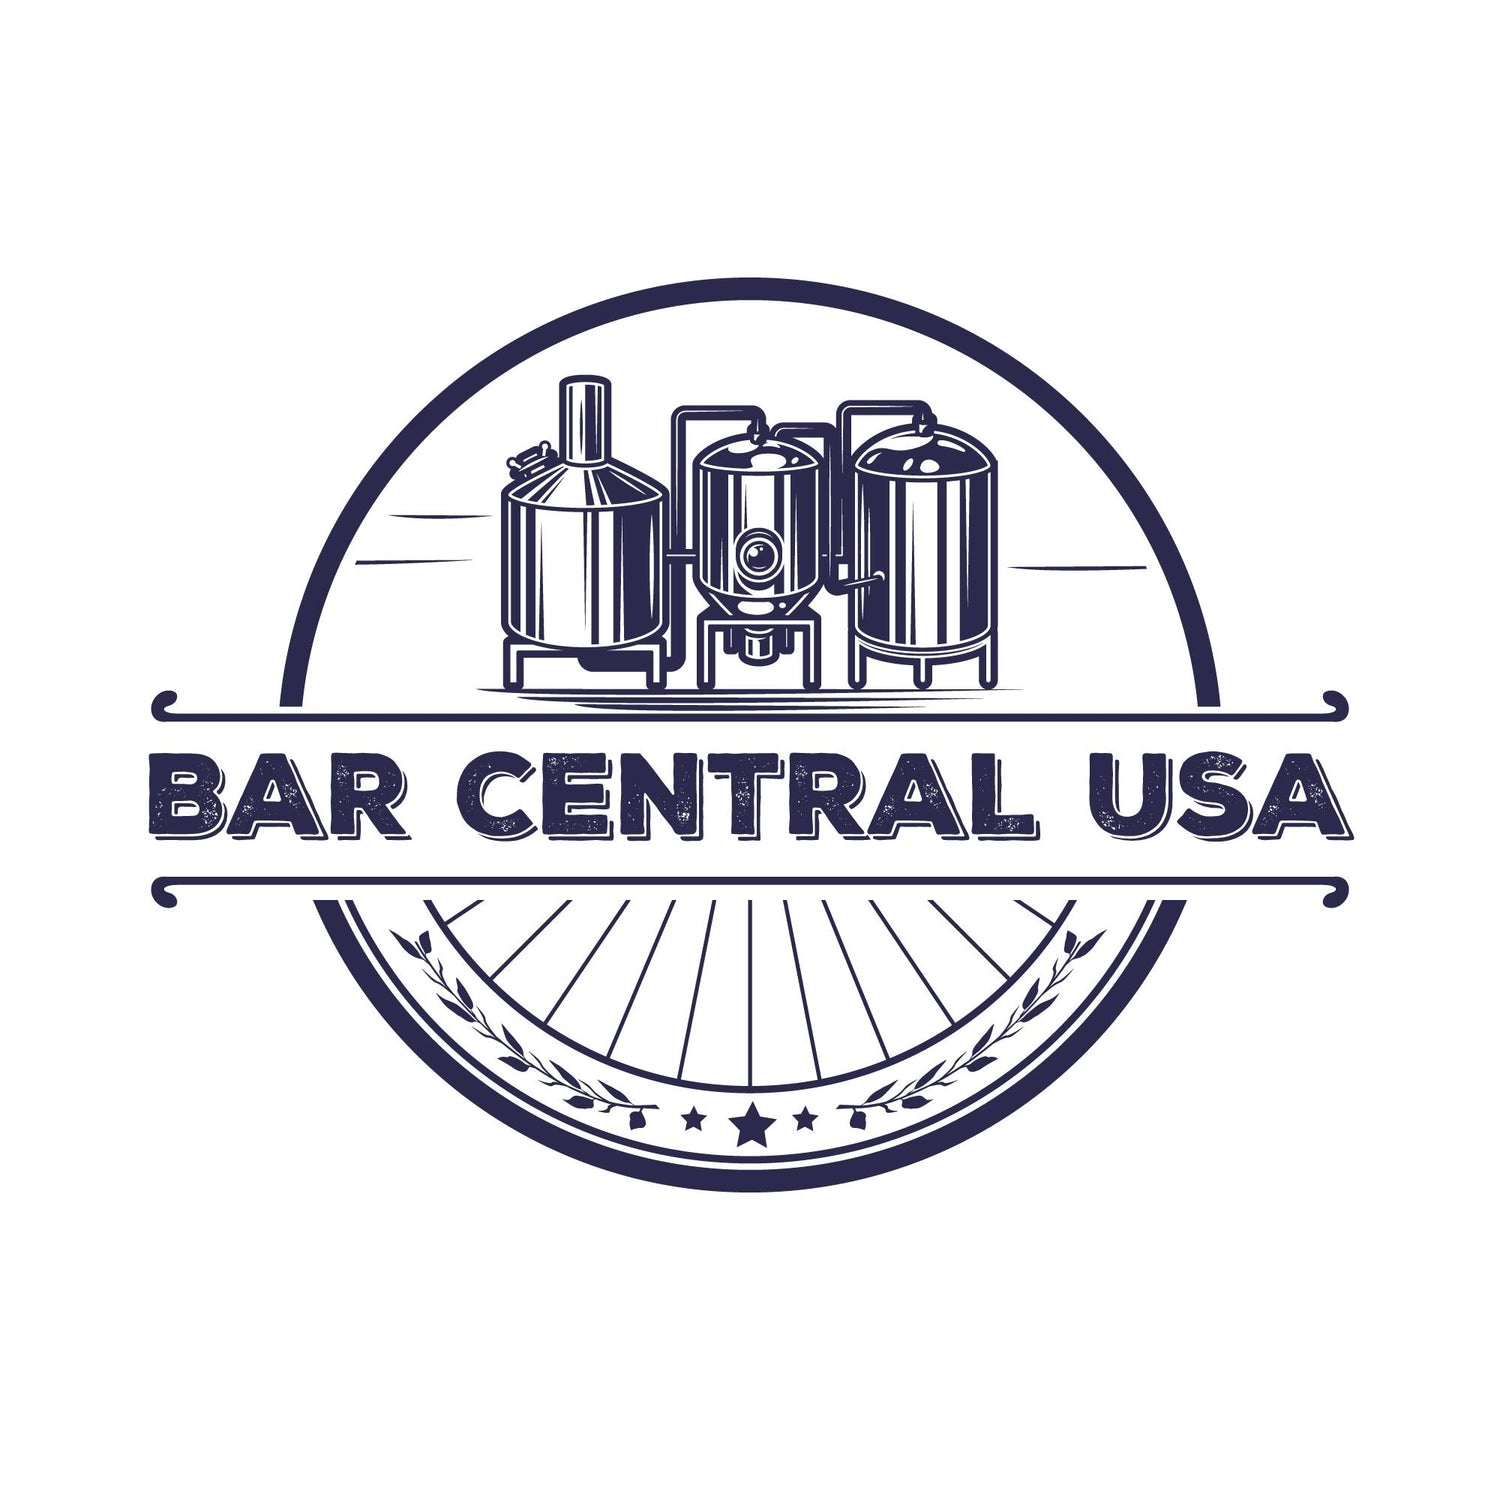 Welcome to Bar Central USA!